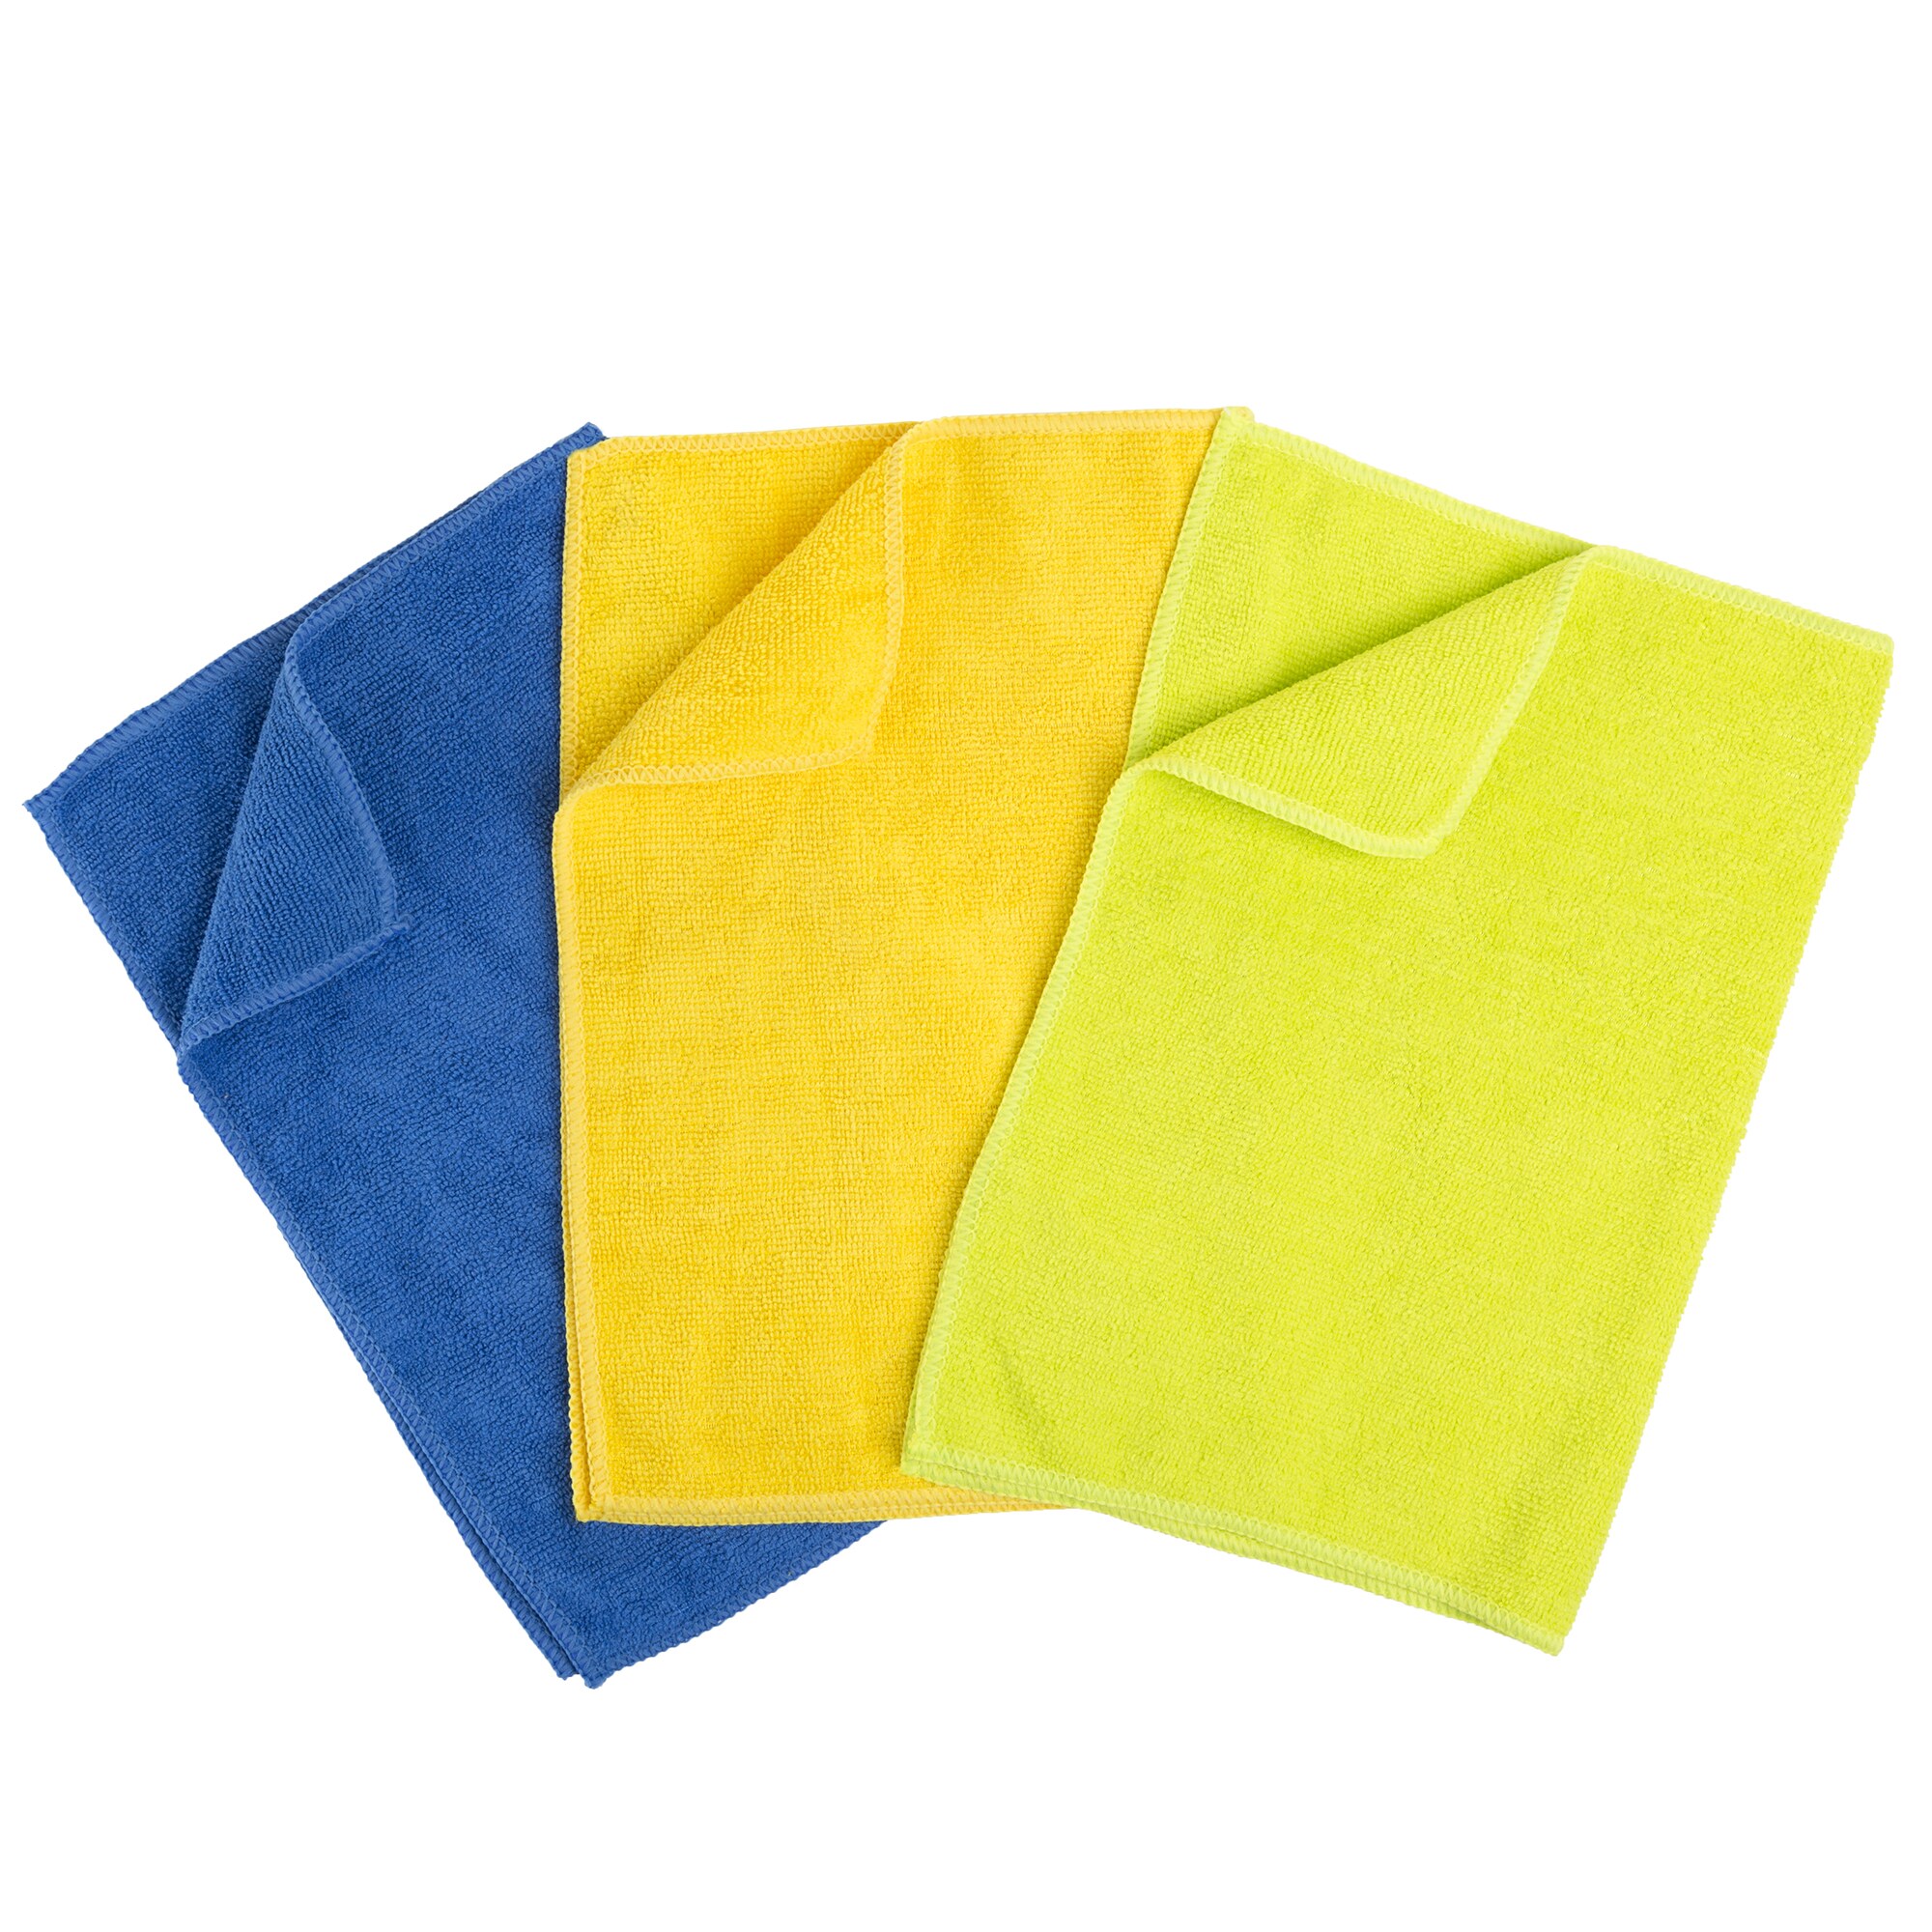 Stalwart Windshield Cleaner with Microfiber Cloth (Green)